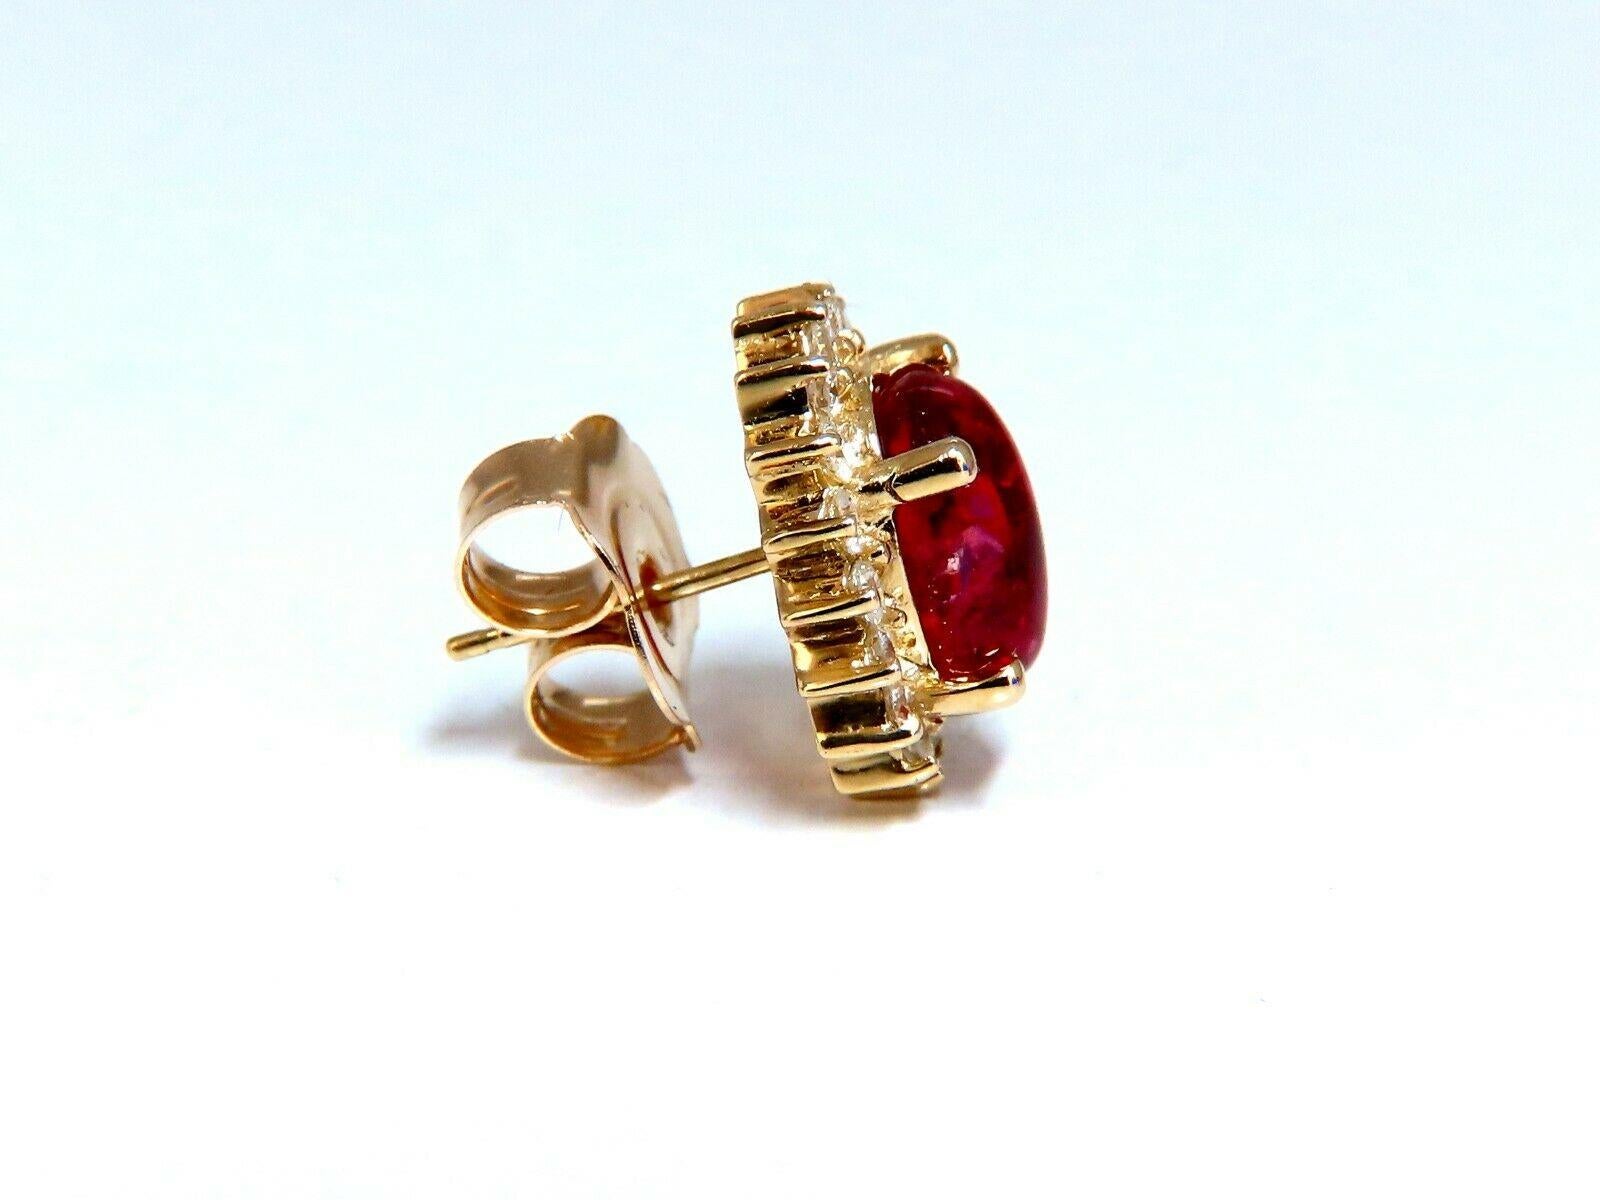 Spinel Cocktail Halo Earrings

5.00ct. Natural Raspberry Red Spinels

Cabochon Cut, Clean clarity and brilliant cut

Excellent transparency

9 x 7mm 

.95ct. Round diamonds

G-color, Vs-2 clarity

14kt. yellow gold

6.7 grams

Earrings overall: